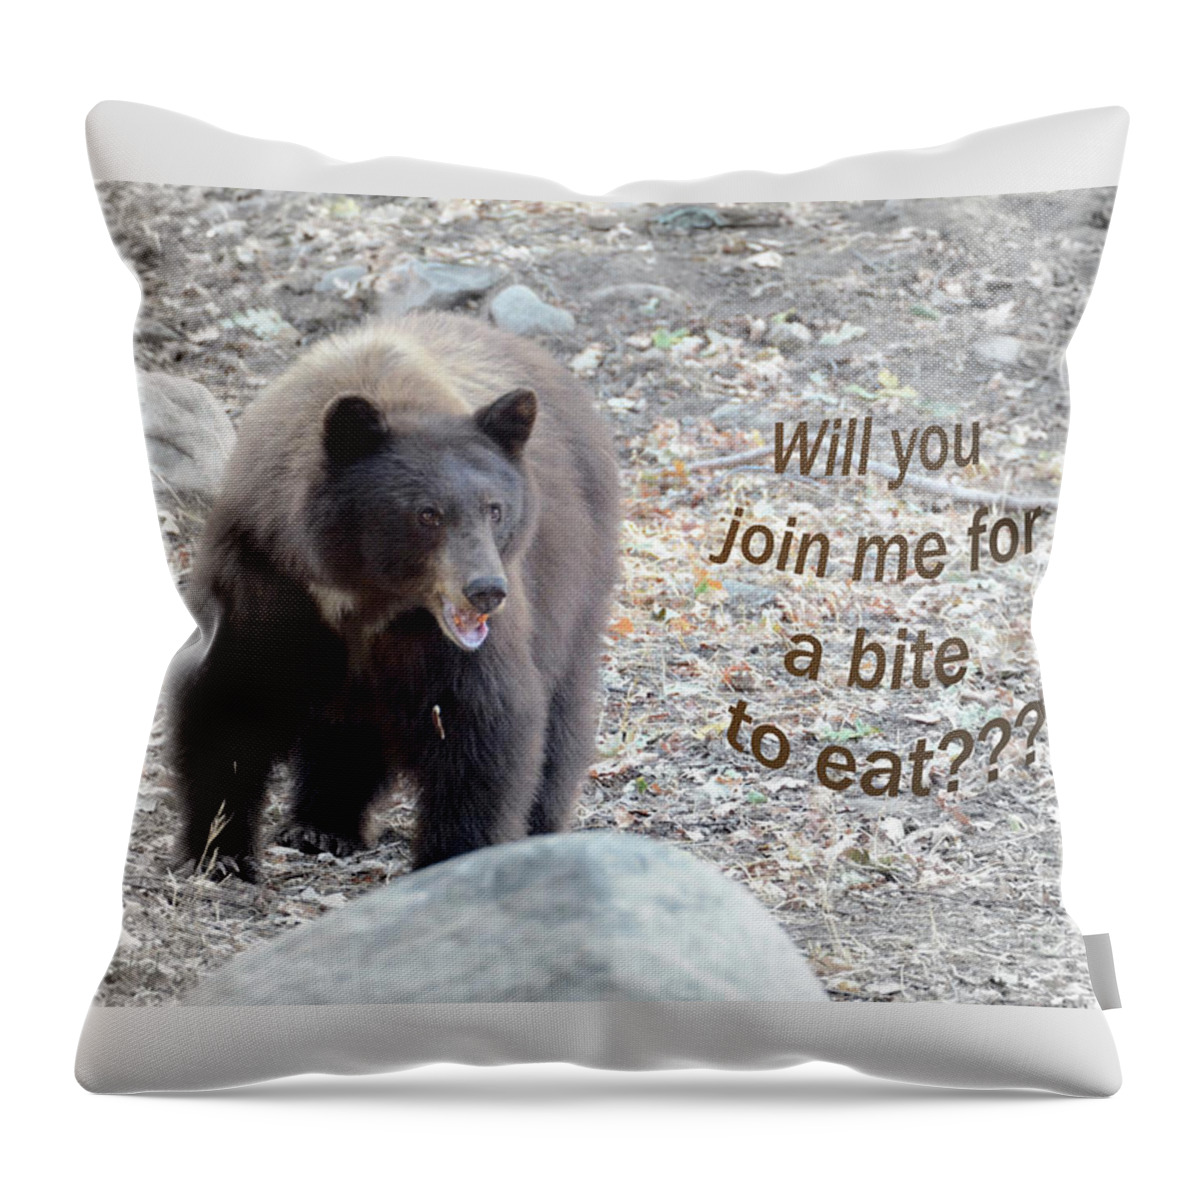 Pun Throw Pillow featuring the photograph Will You Join Me by Debby Pueschel